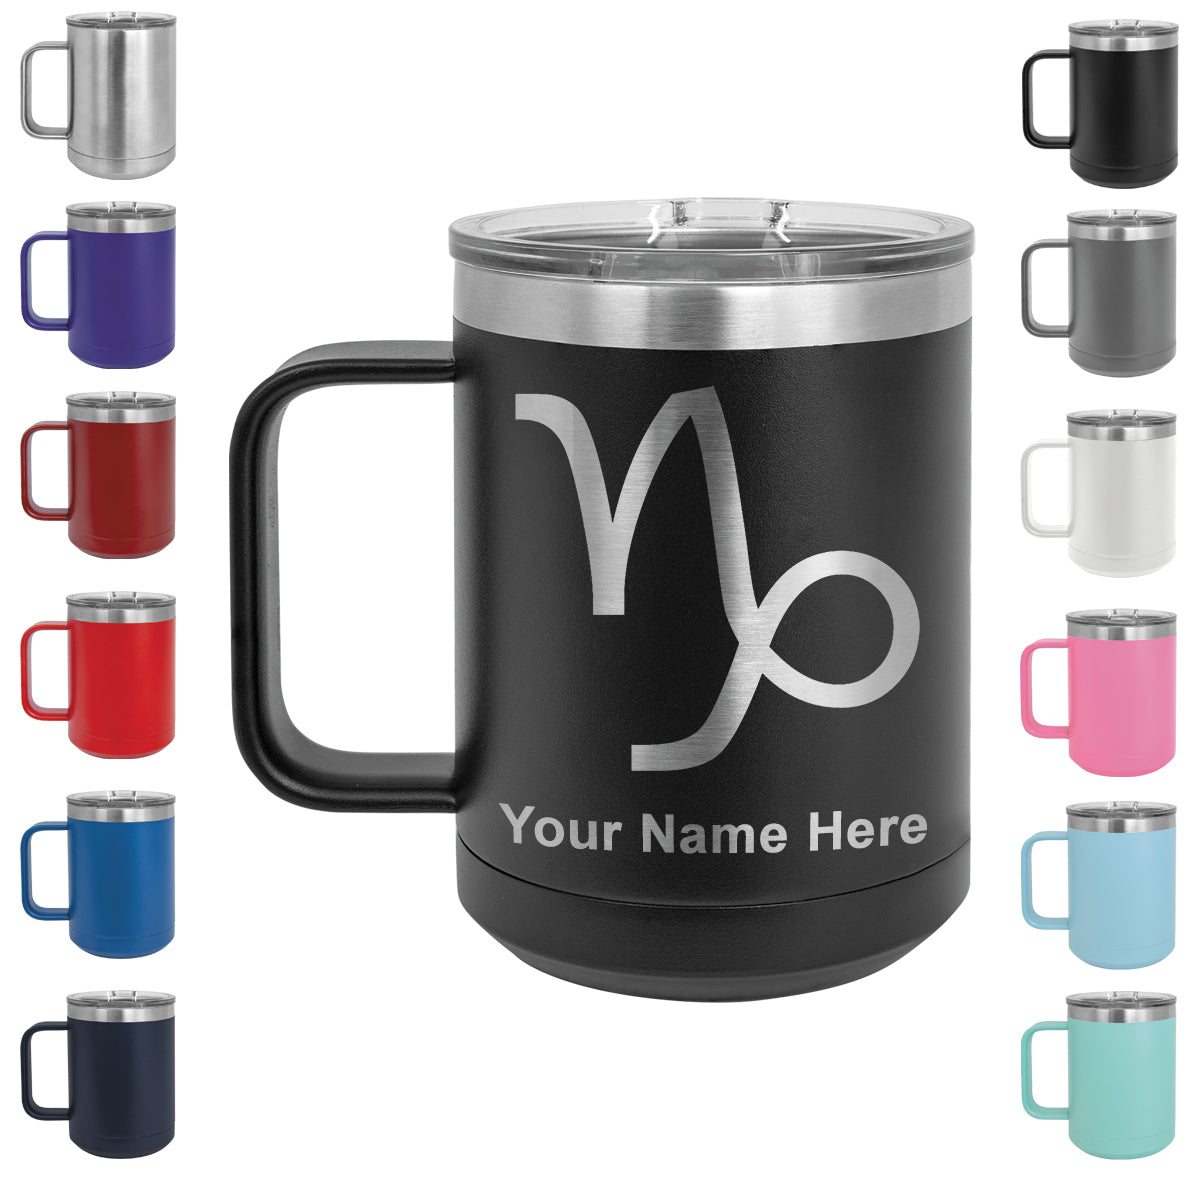 15oz Vacuum Insulated Coffee Mug, Zodiac Sign Capricorn, Personalized Engraving Included